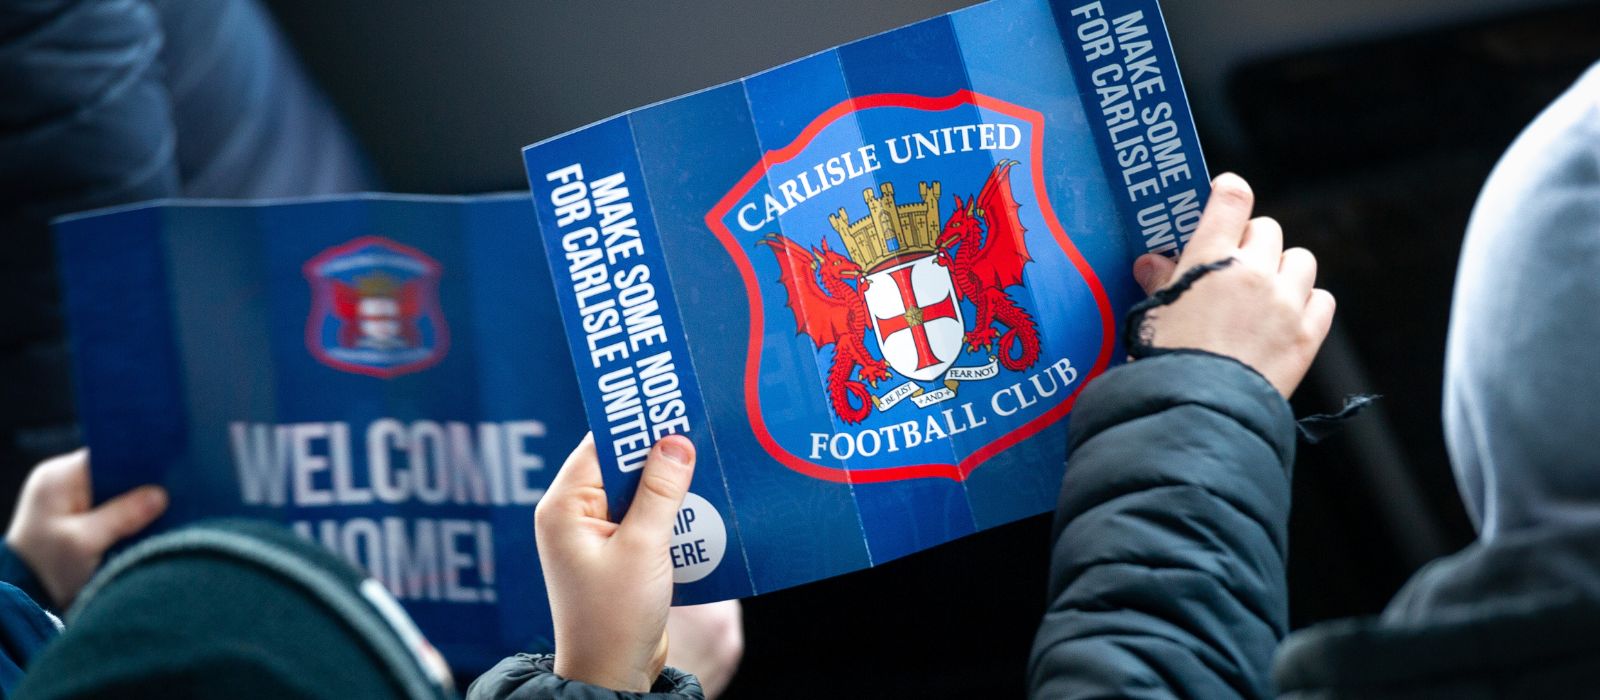 The Cumberland sponsors Carlisle United for two more years